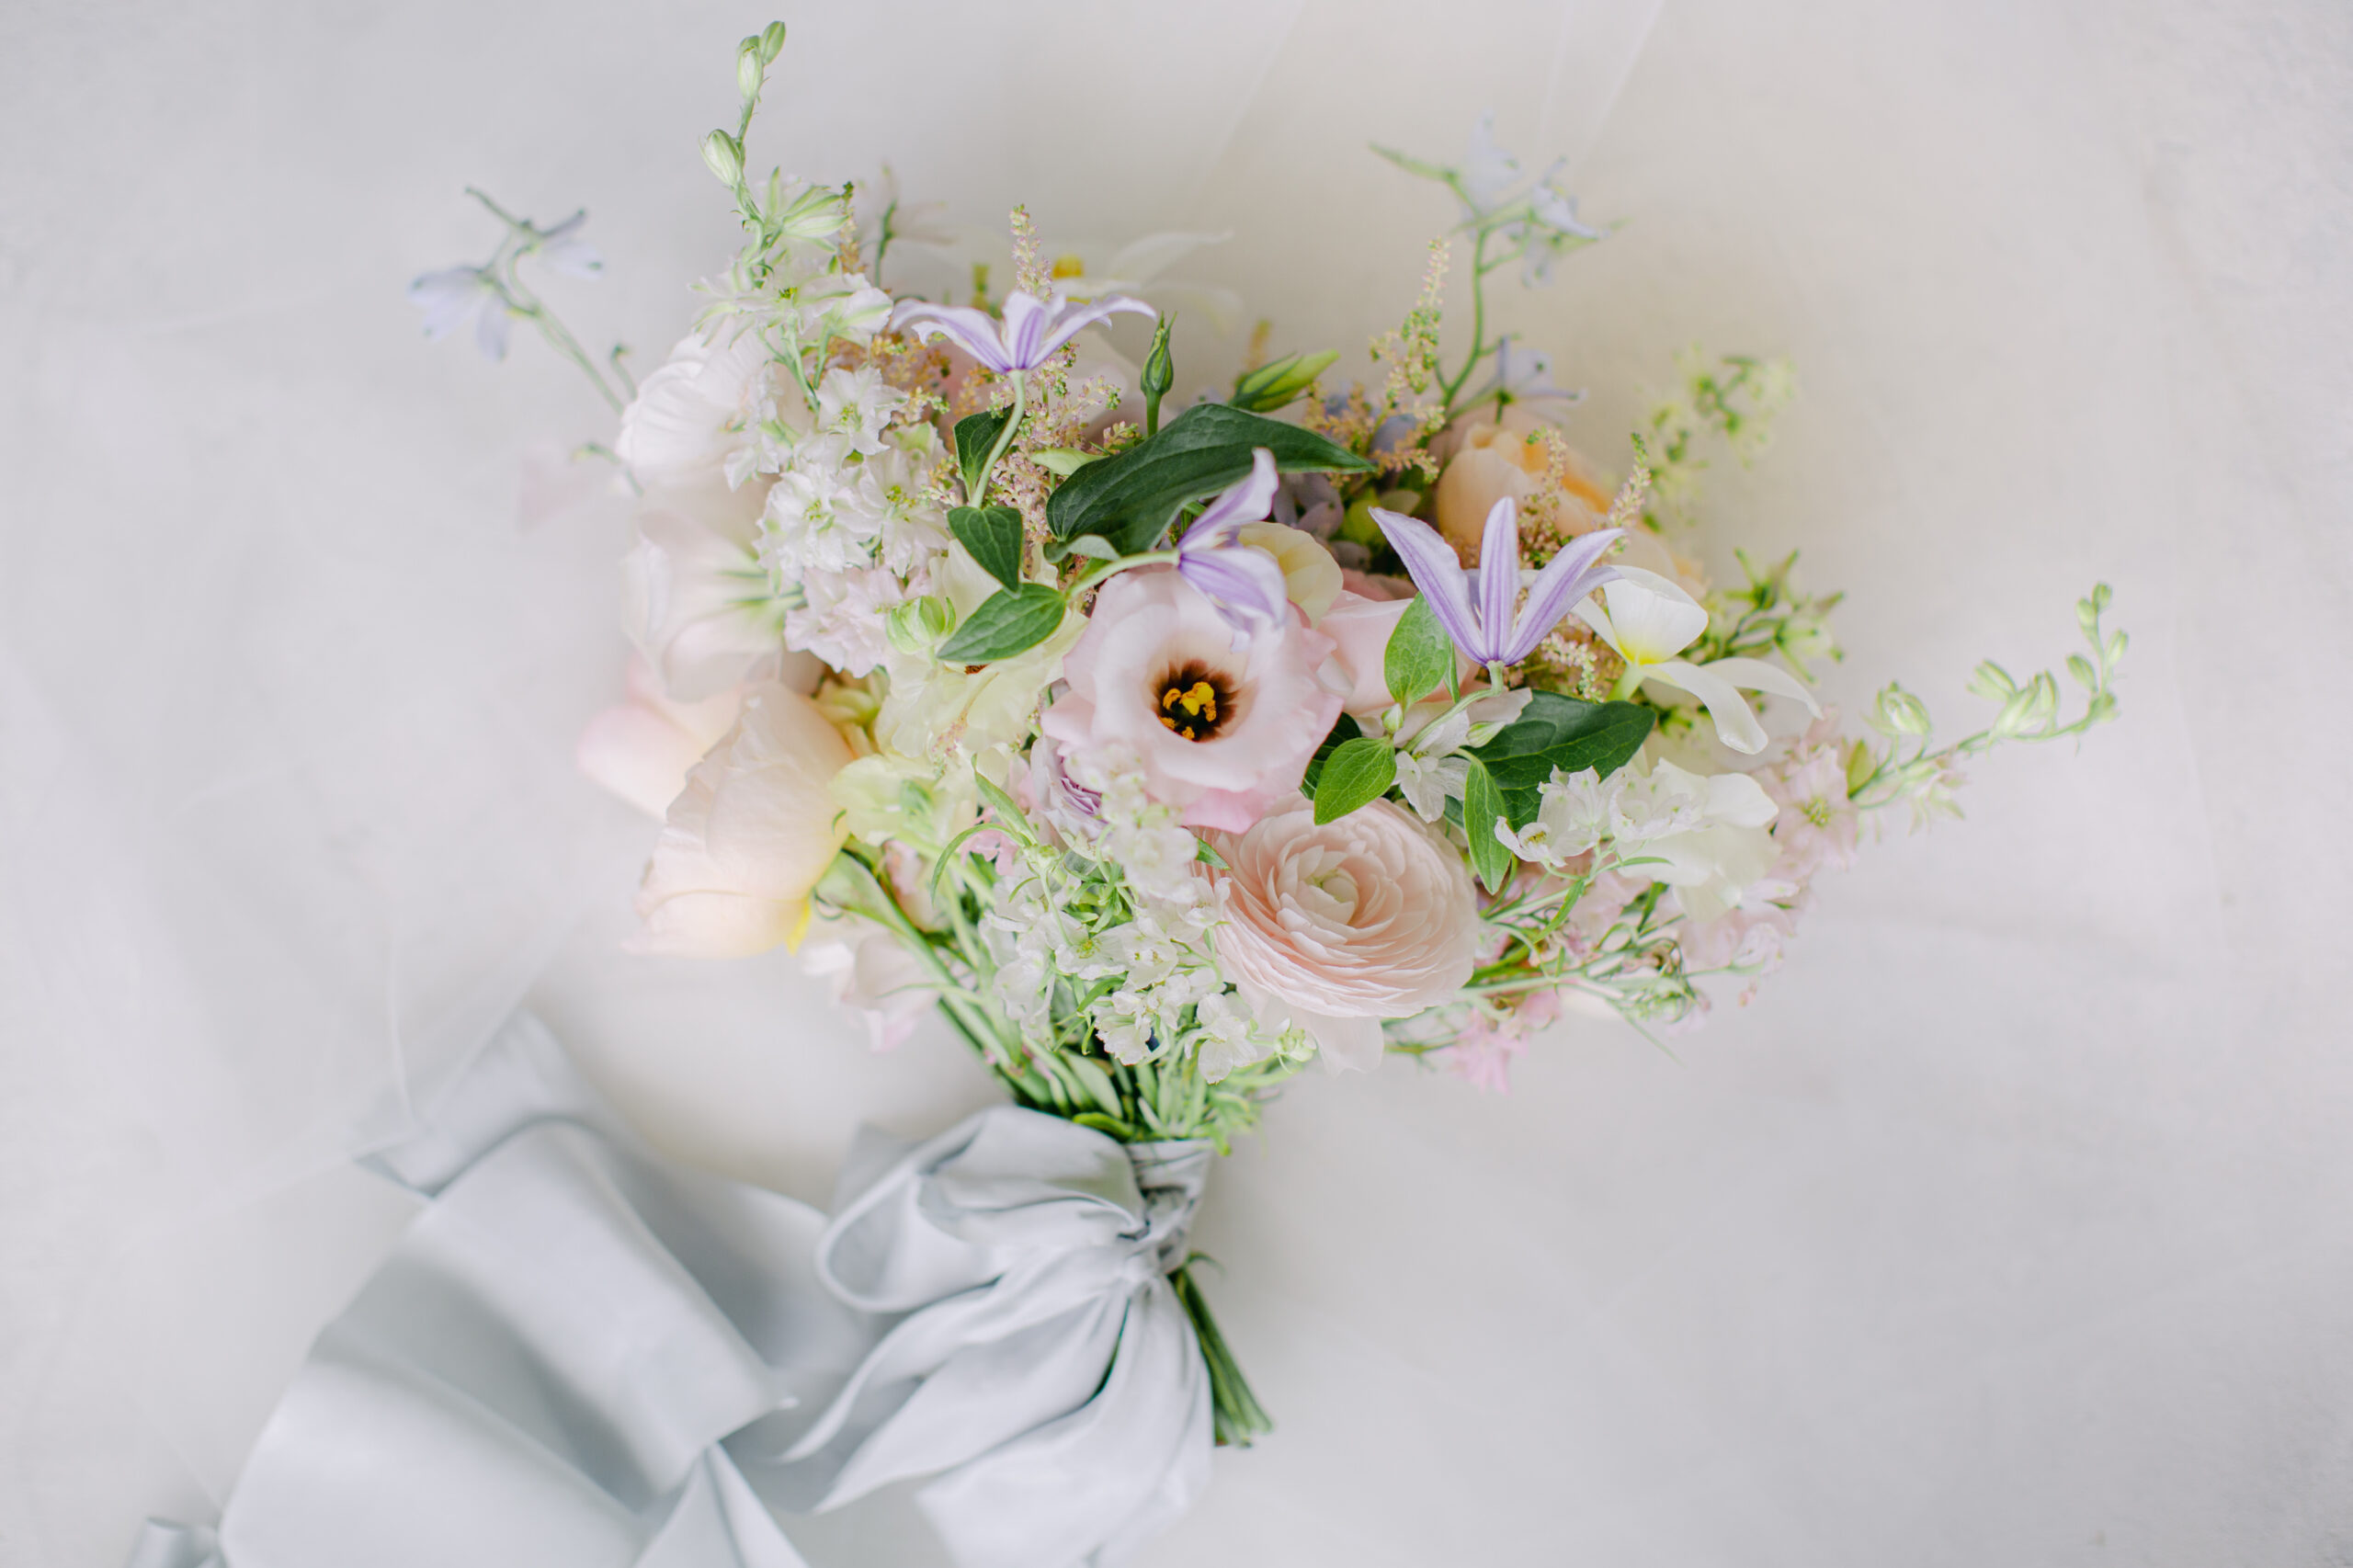 bridal bouquet in pastels of pinks and peaches with accents of green and white featuring ranunculus and roses with a pastel blue silk ribbon.